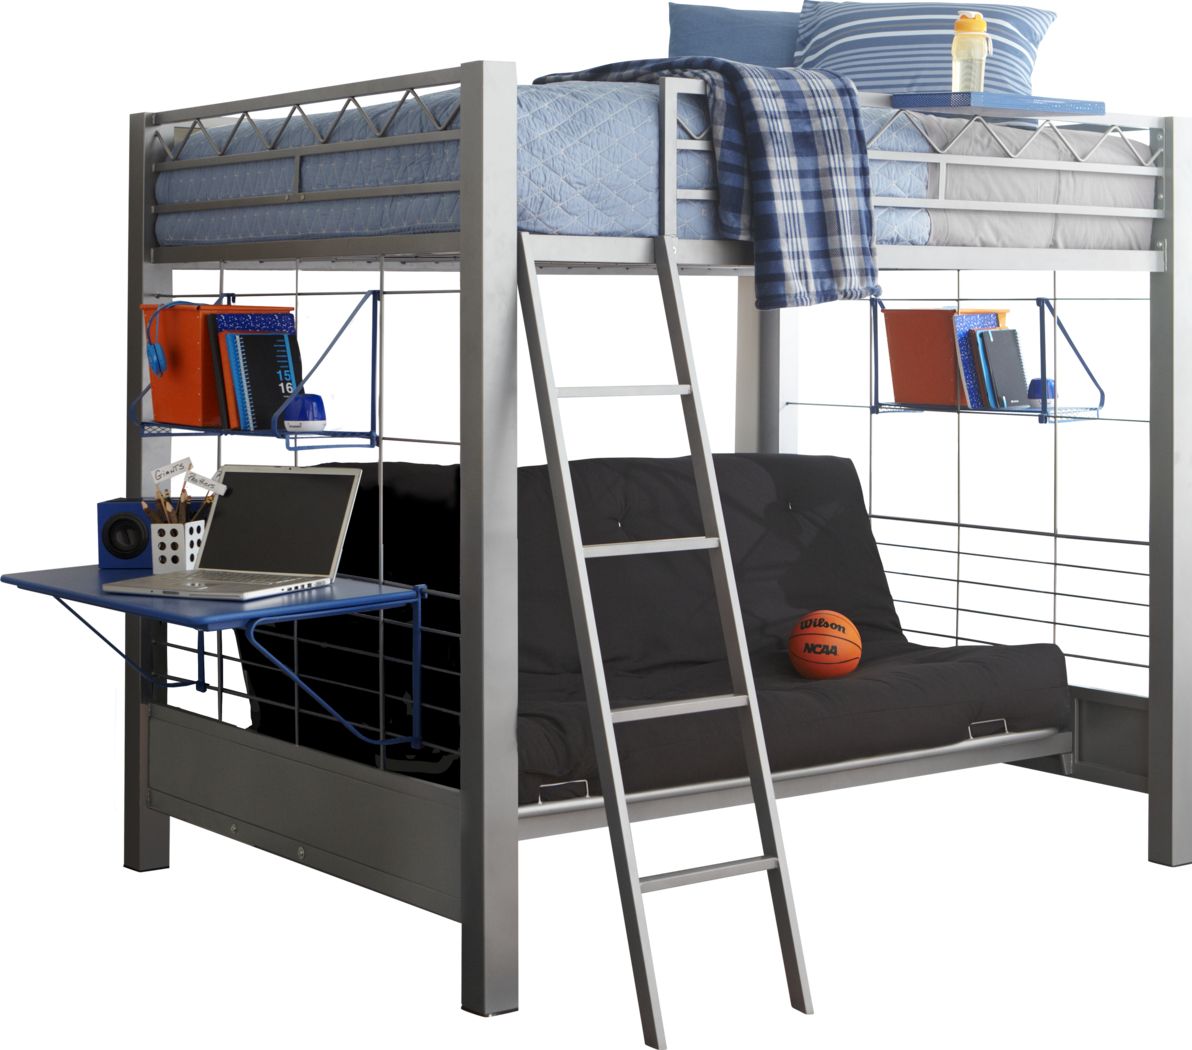 Kids Bunk Beds With Futons Underneath, Bunk Bed With Seating Underneath